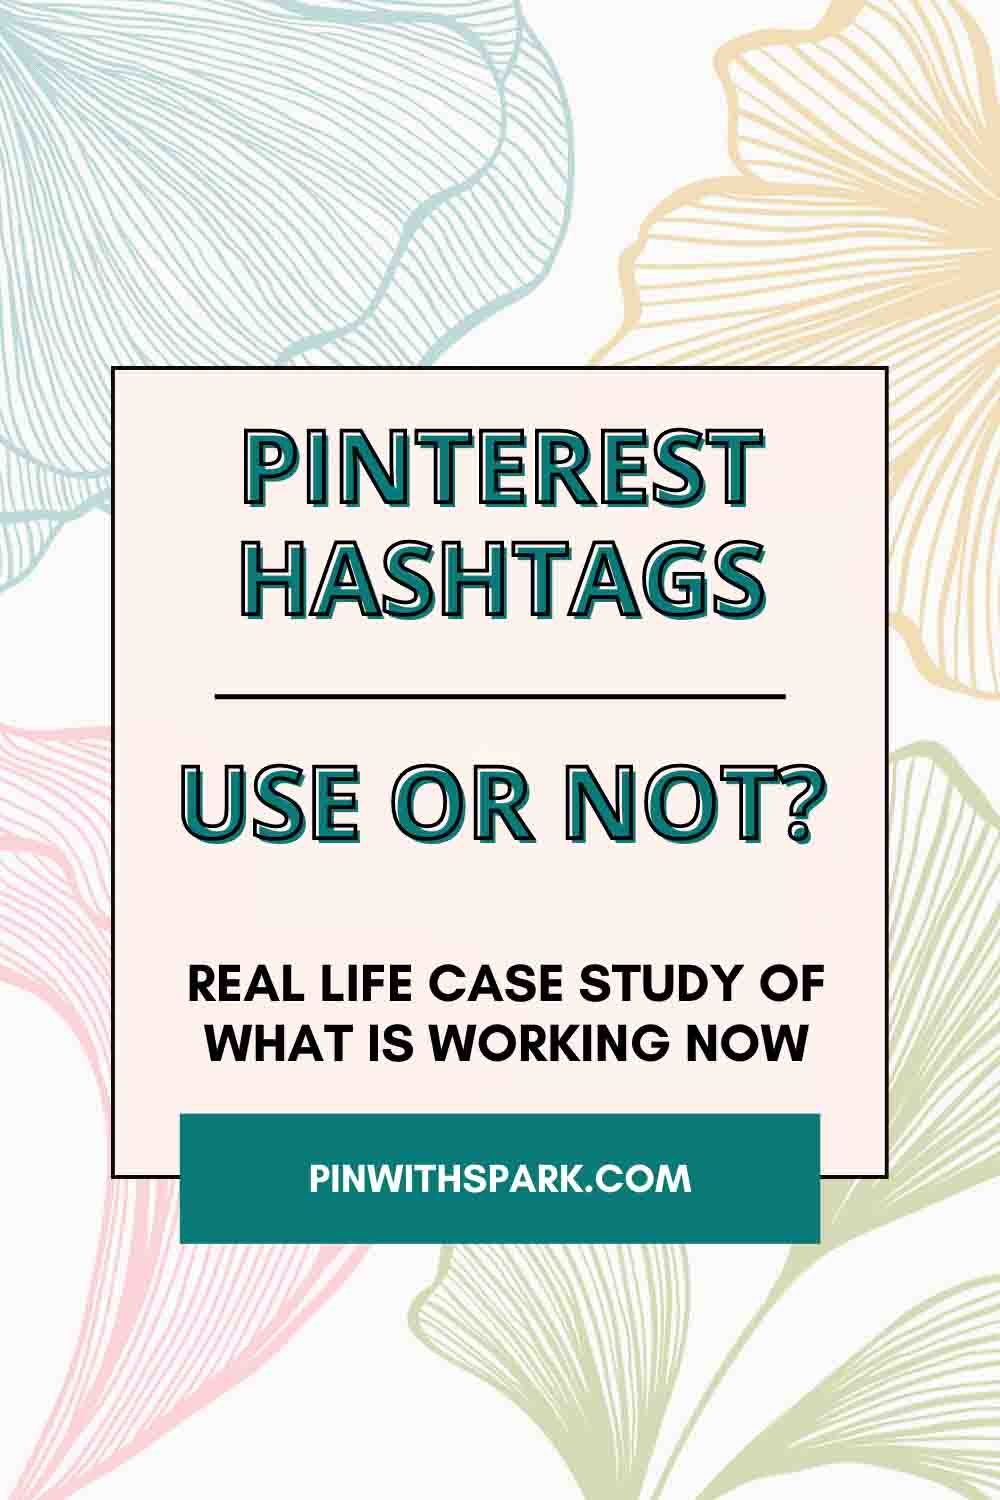 Pinterest Hashtags Use or Note